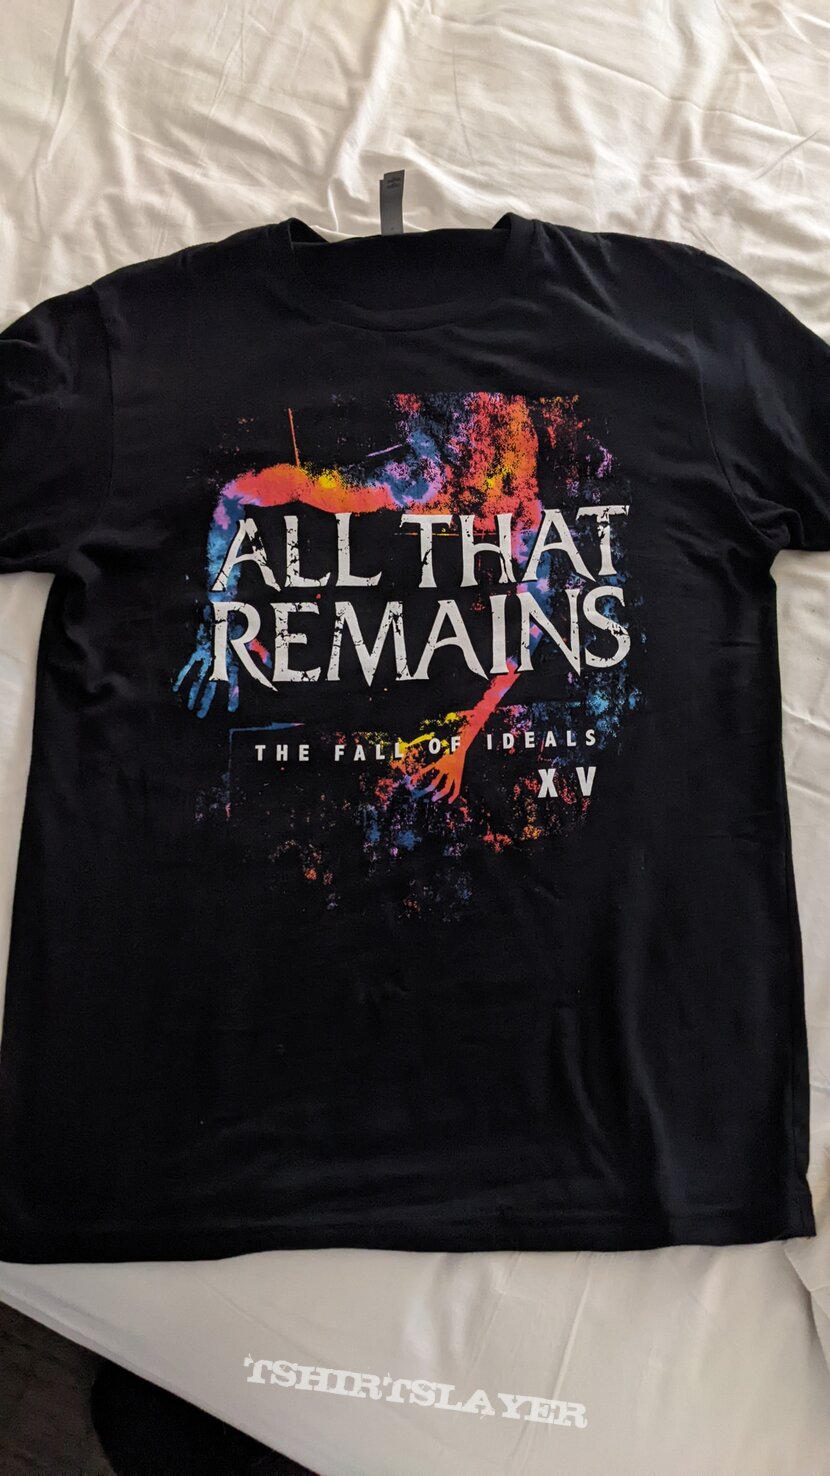 All That Remains - The Fall of Ideals XV anniversary shirt